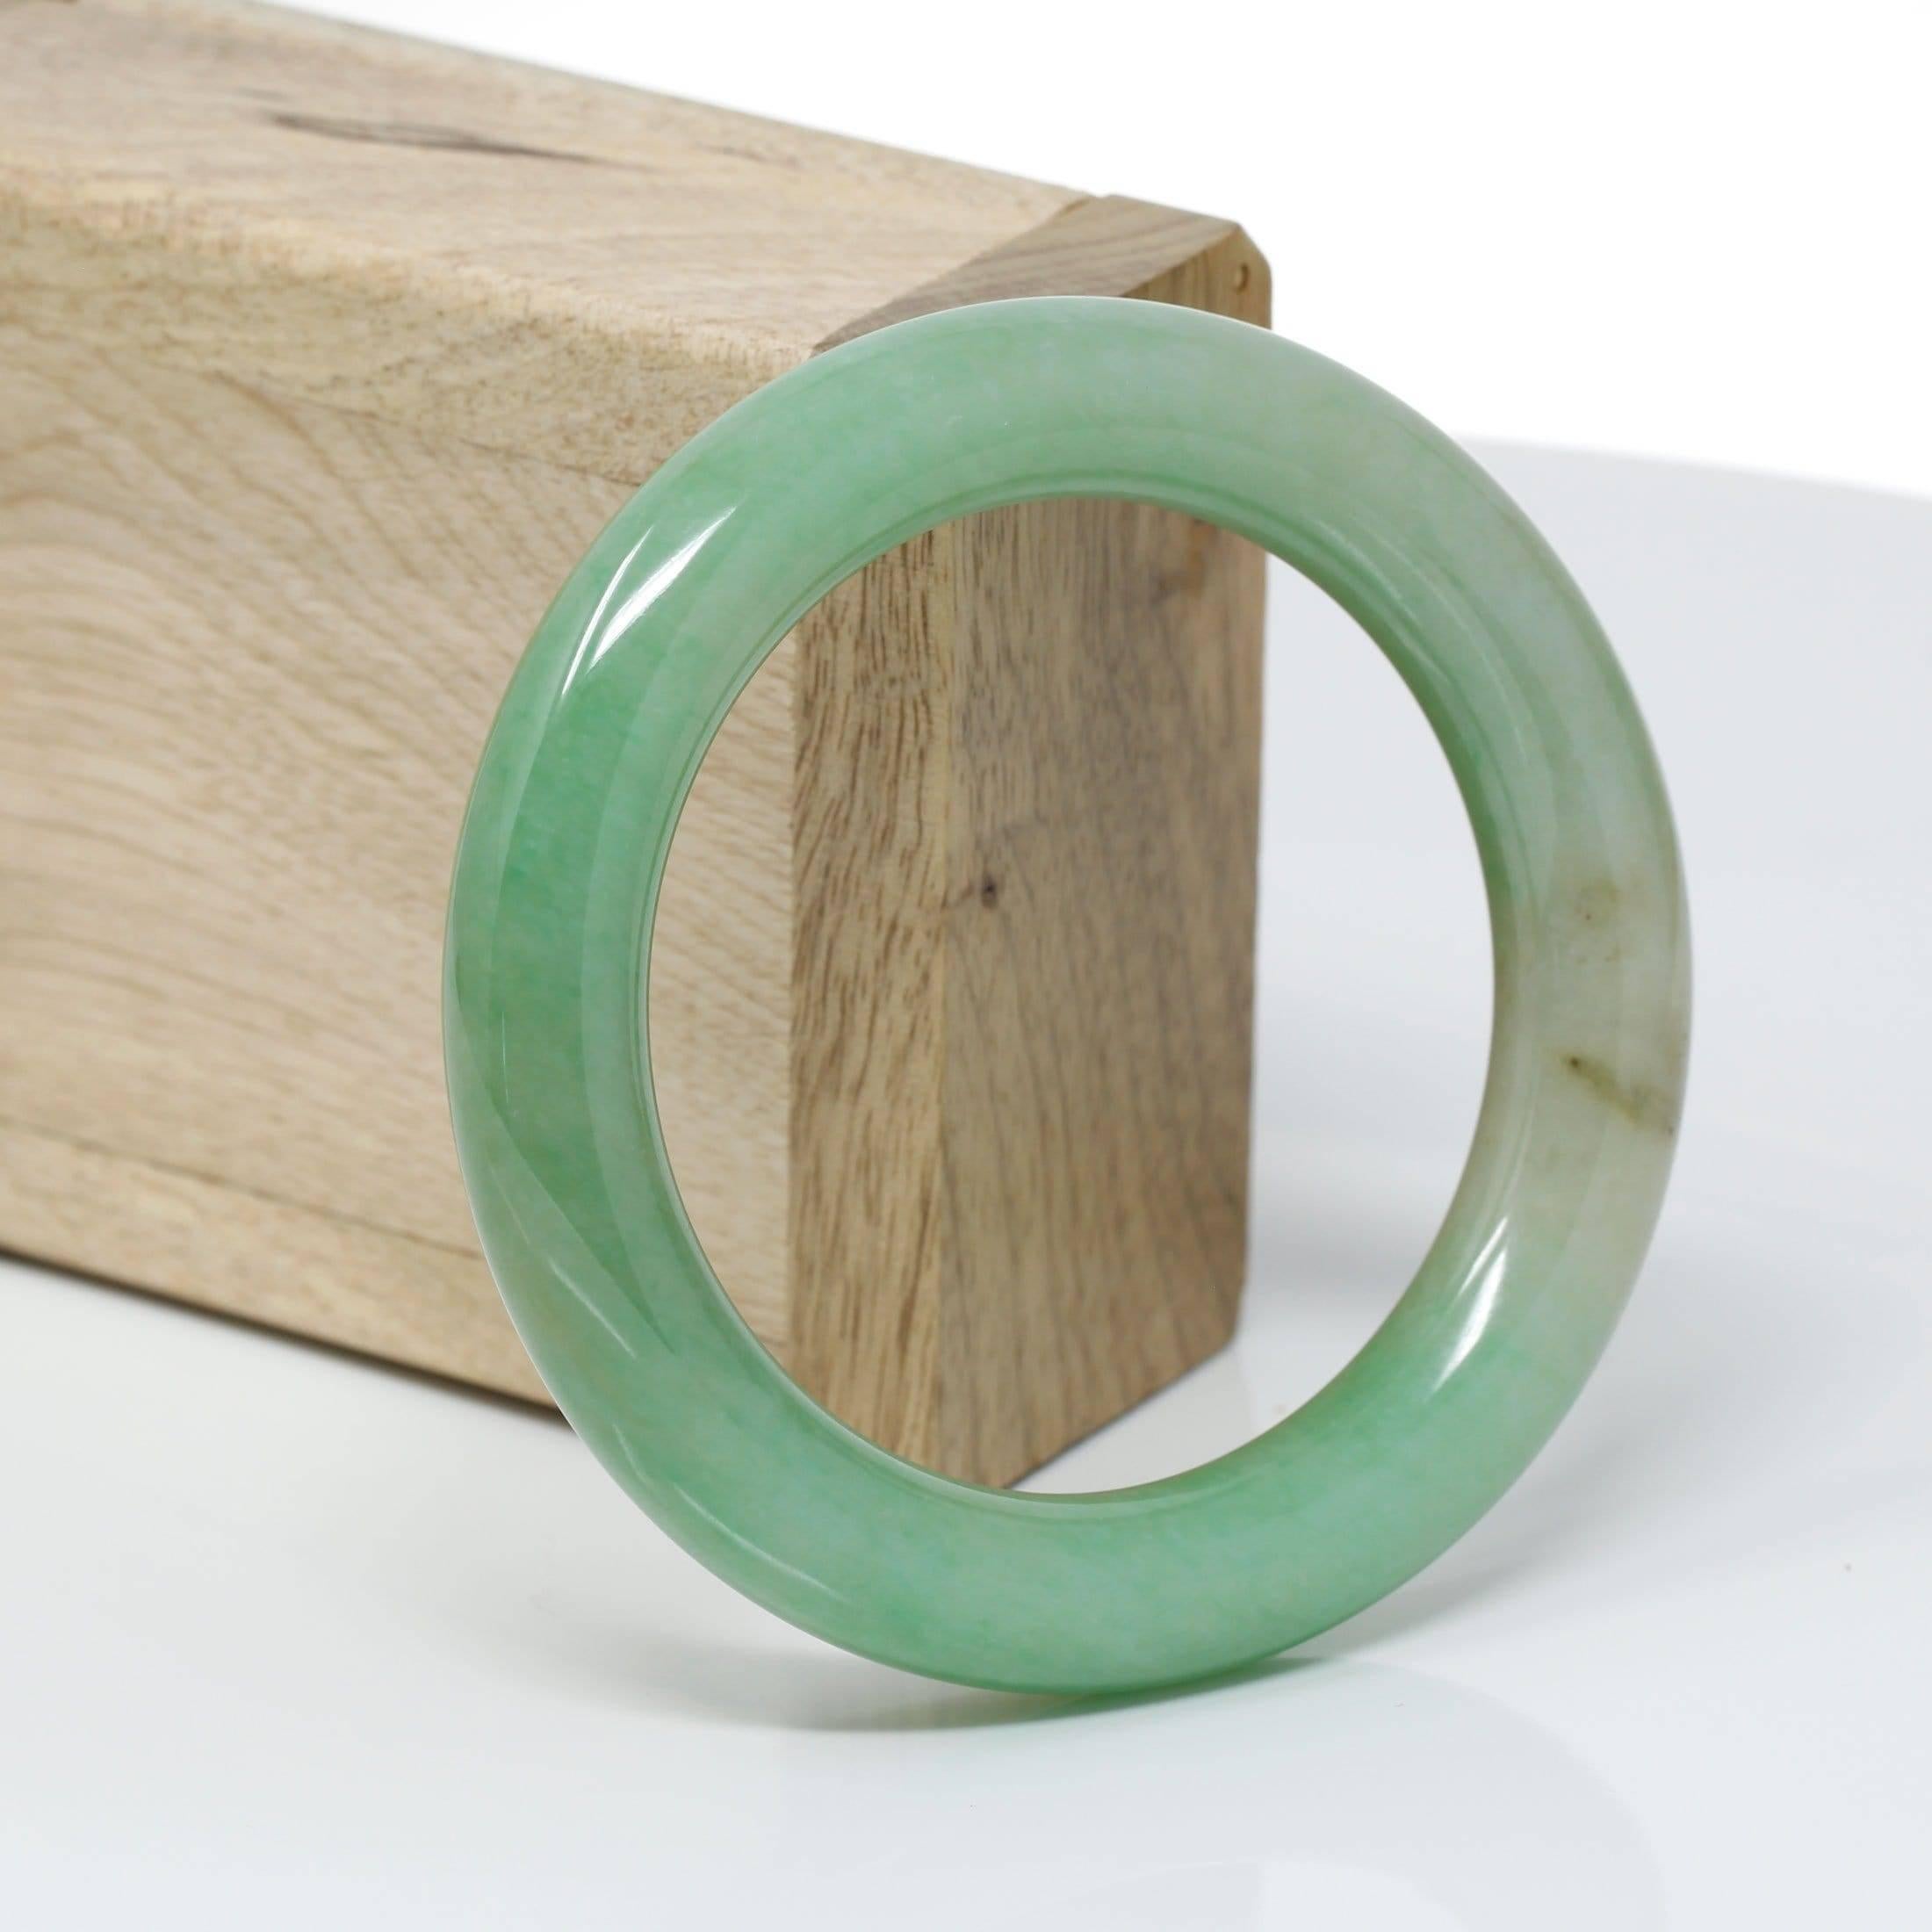  * DETAILS--- Genuine Burmese Jadeite Jade Bangle Bracelet. This bangle is made with high-quality genuine Burmese forest green jadeite jade. The jade texture is very smooth with a little green-yellow color inside. The forest green color and